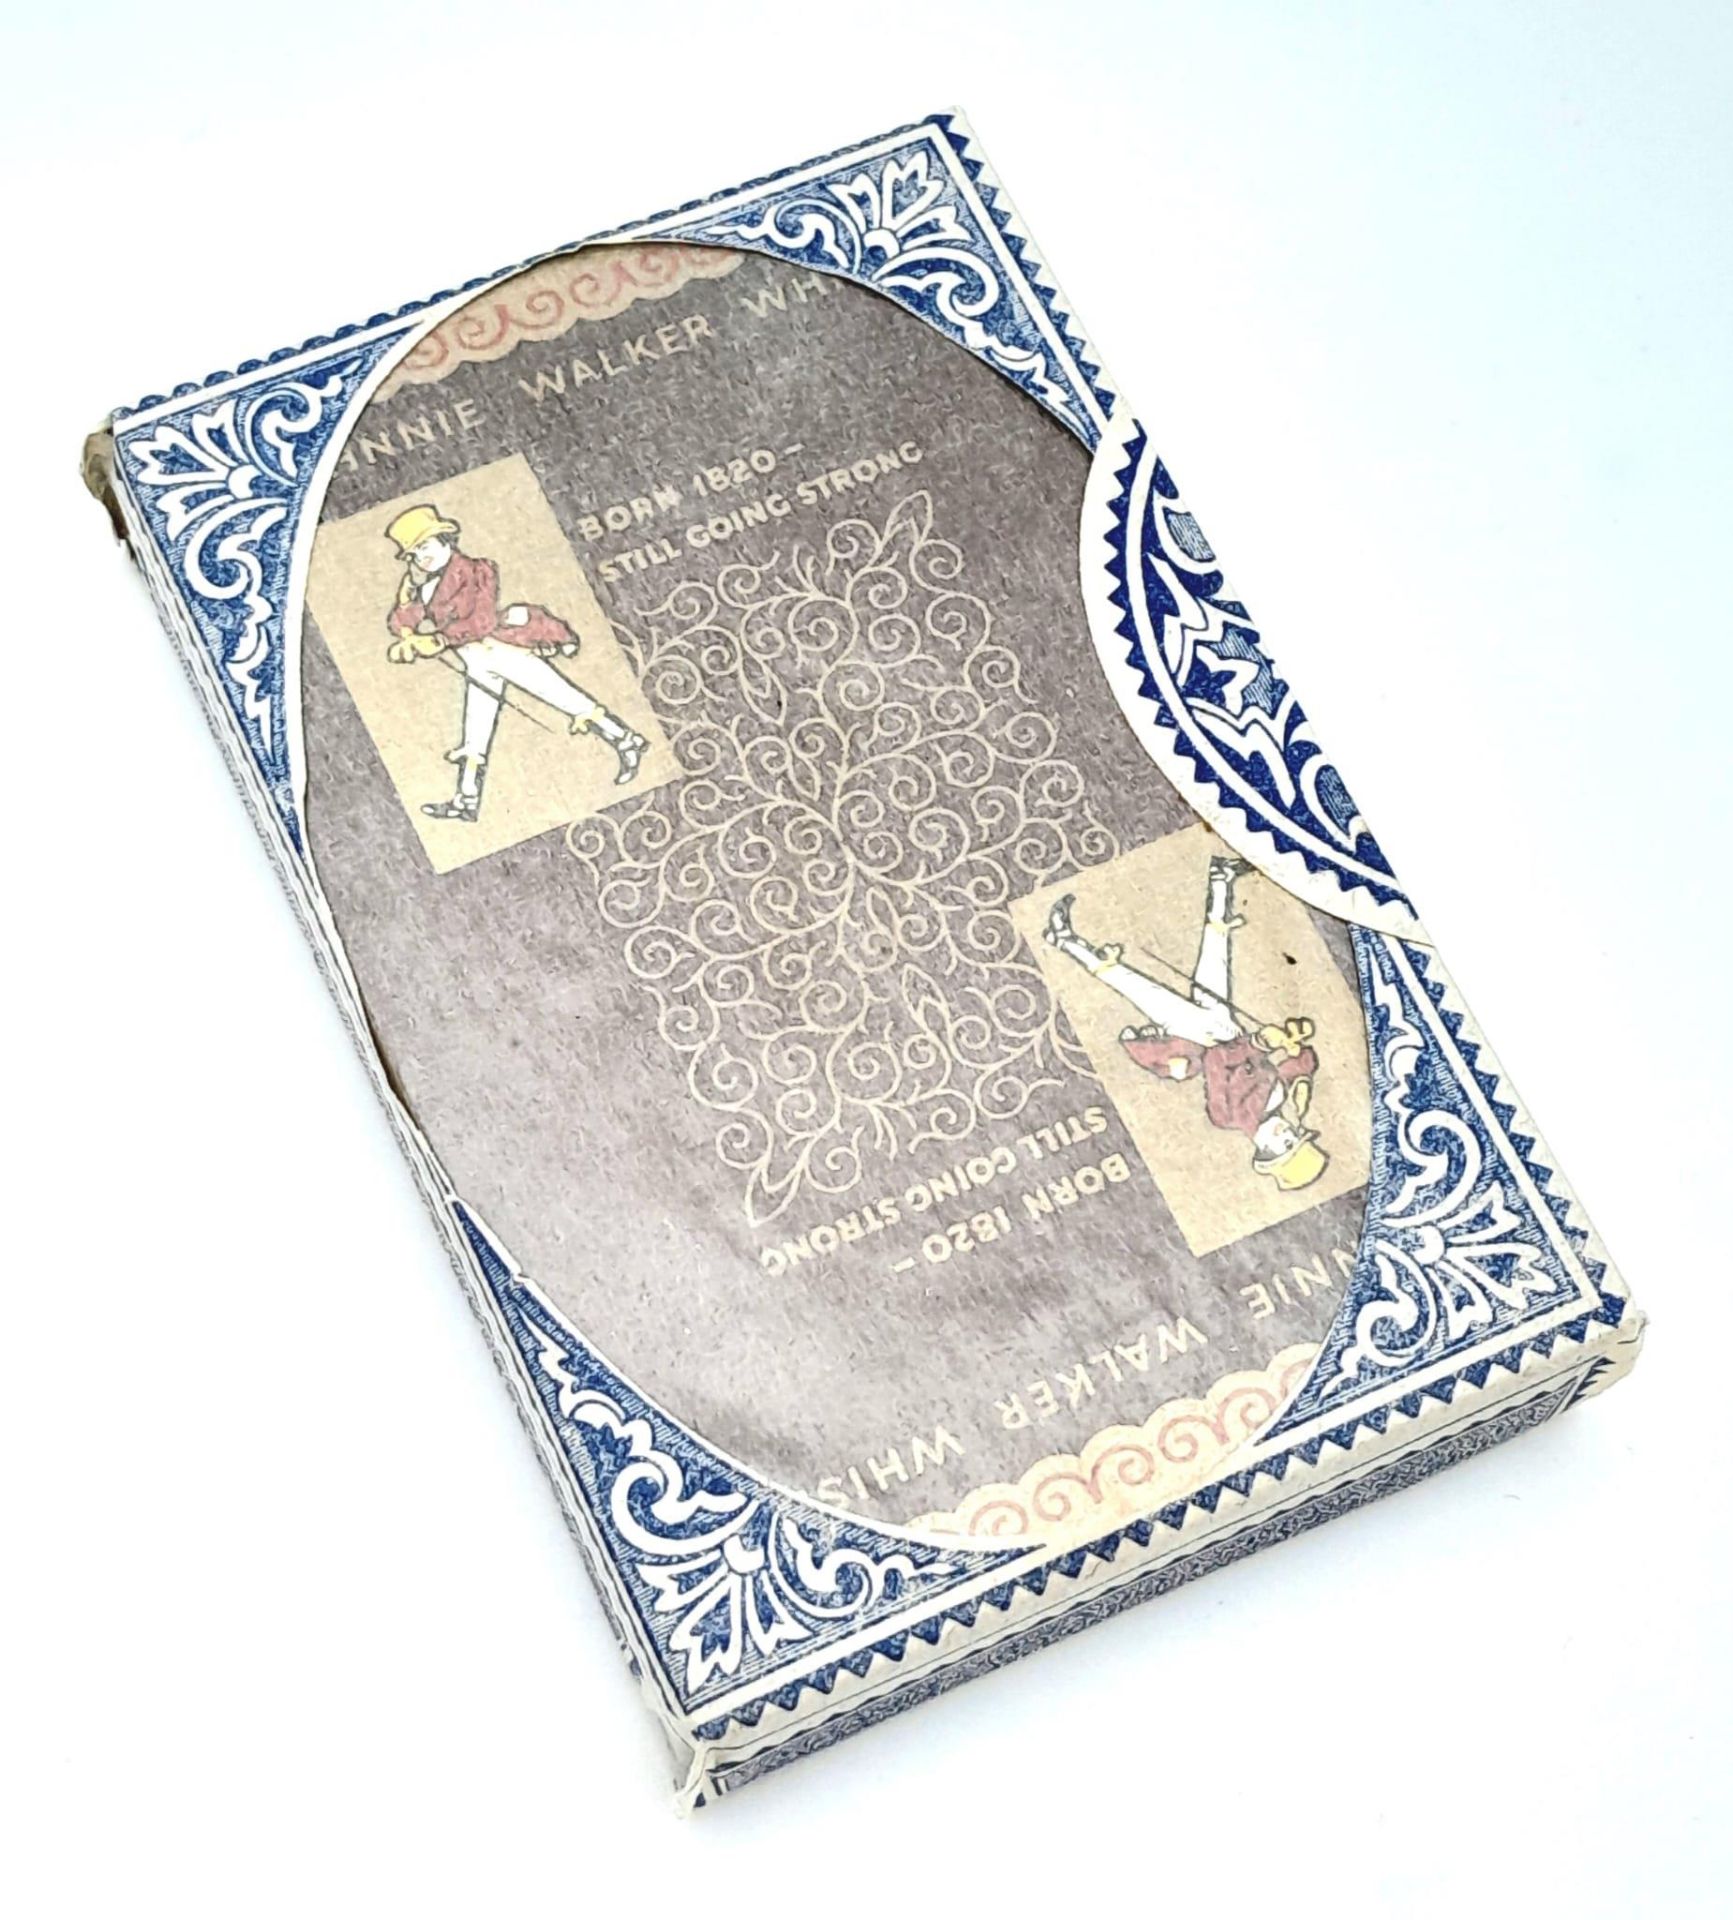 A Pack of Vintage Johnnie Walker Playing Cards - Unopened! - Image 3 of 9